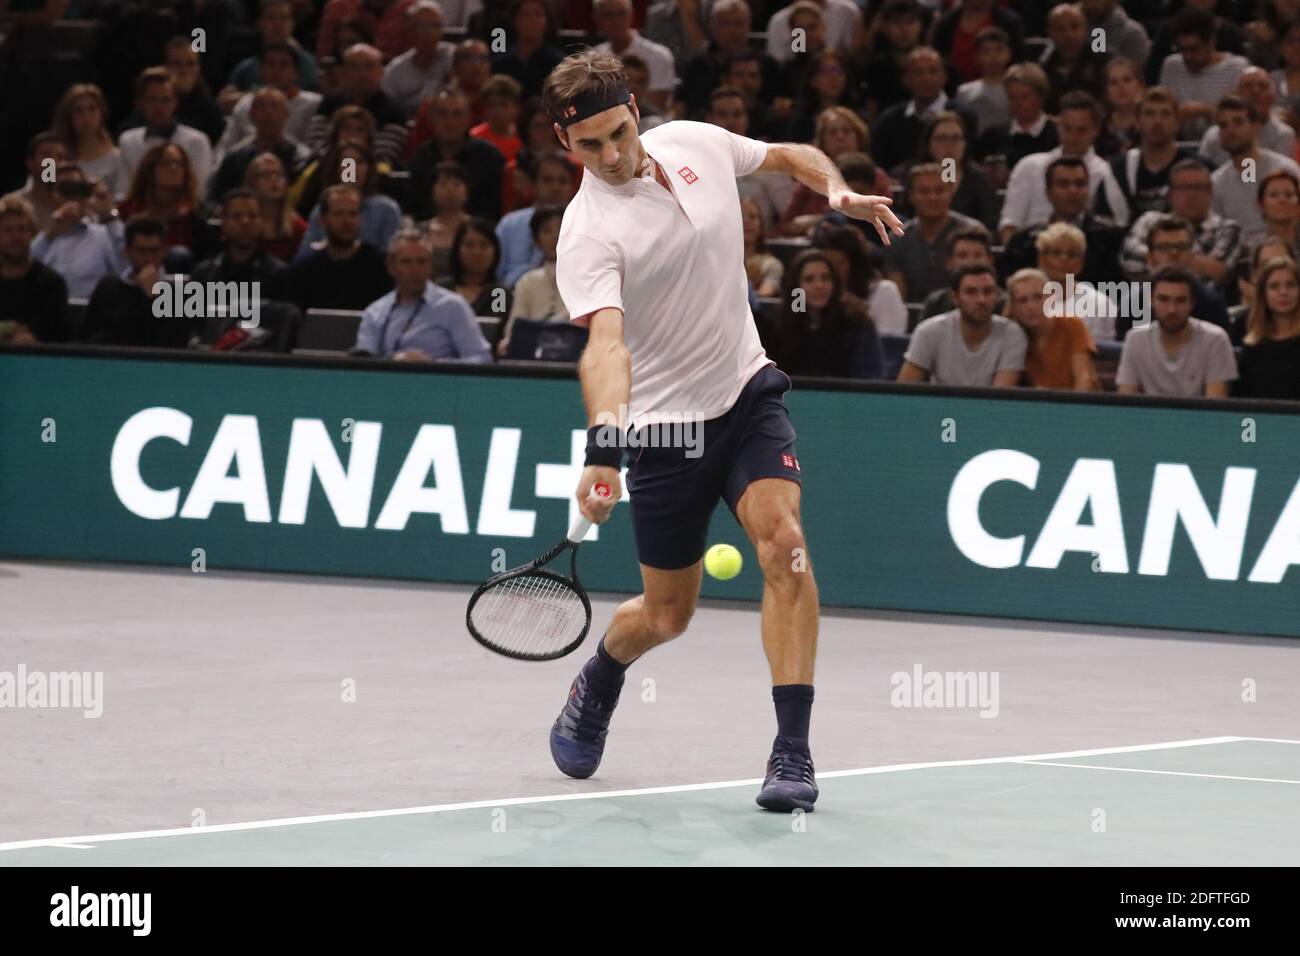 Switzerland's Roger Federer playing in the1/8 of finals of the Rolex Tennis  Masters 2018, at the AccorHotels Arena, Paris, France on November 1, 2018.  Photo by Henri Szwarc/ABACAPRESS.COM Stock Photo - Alamy